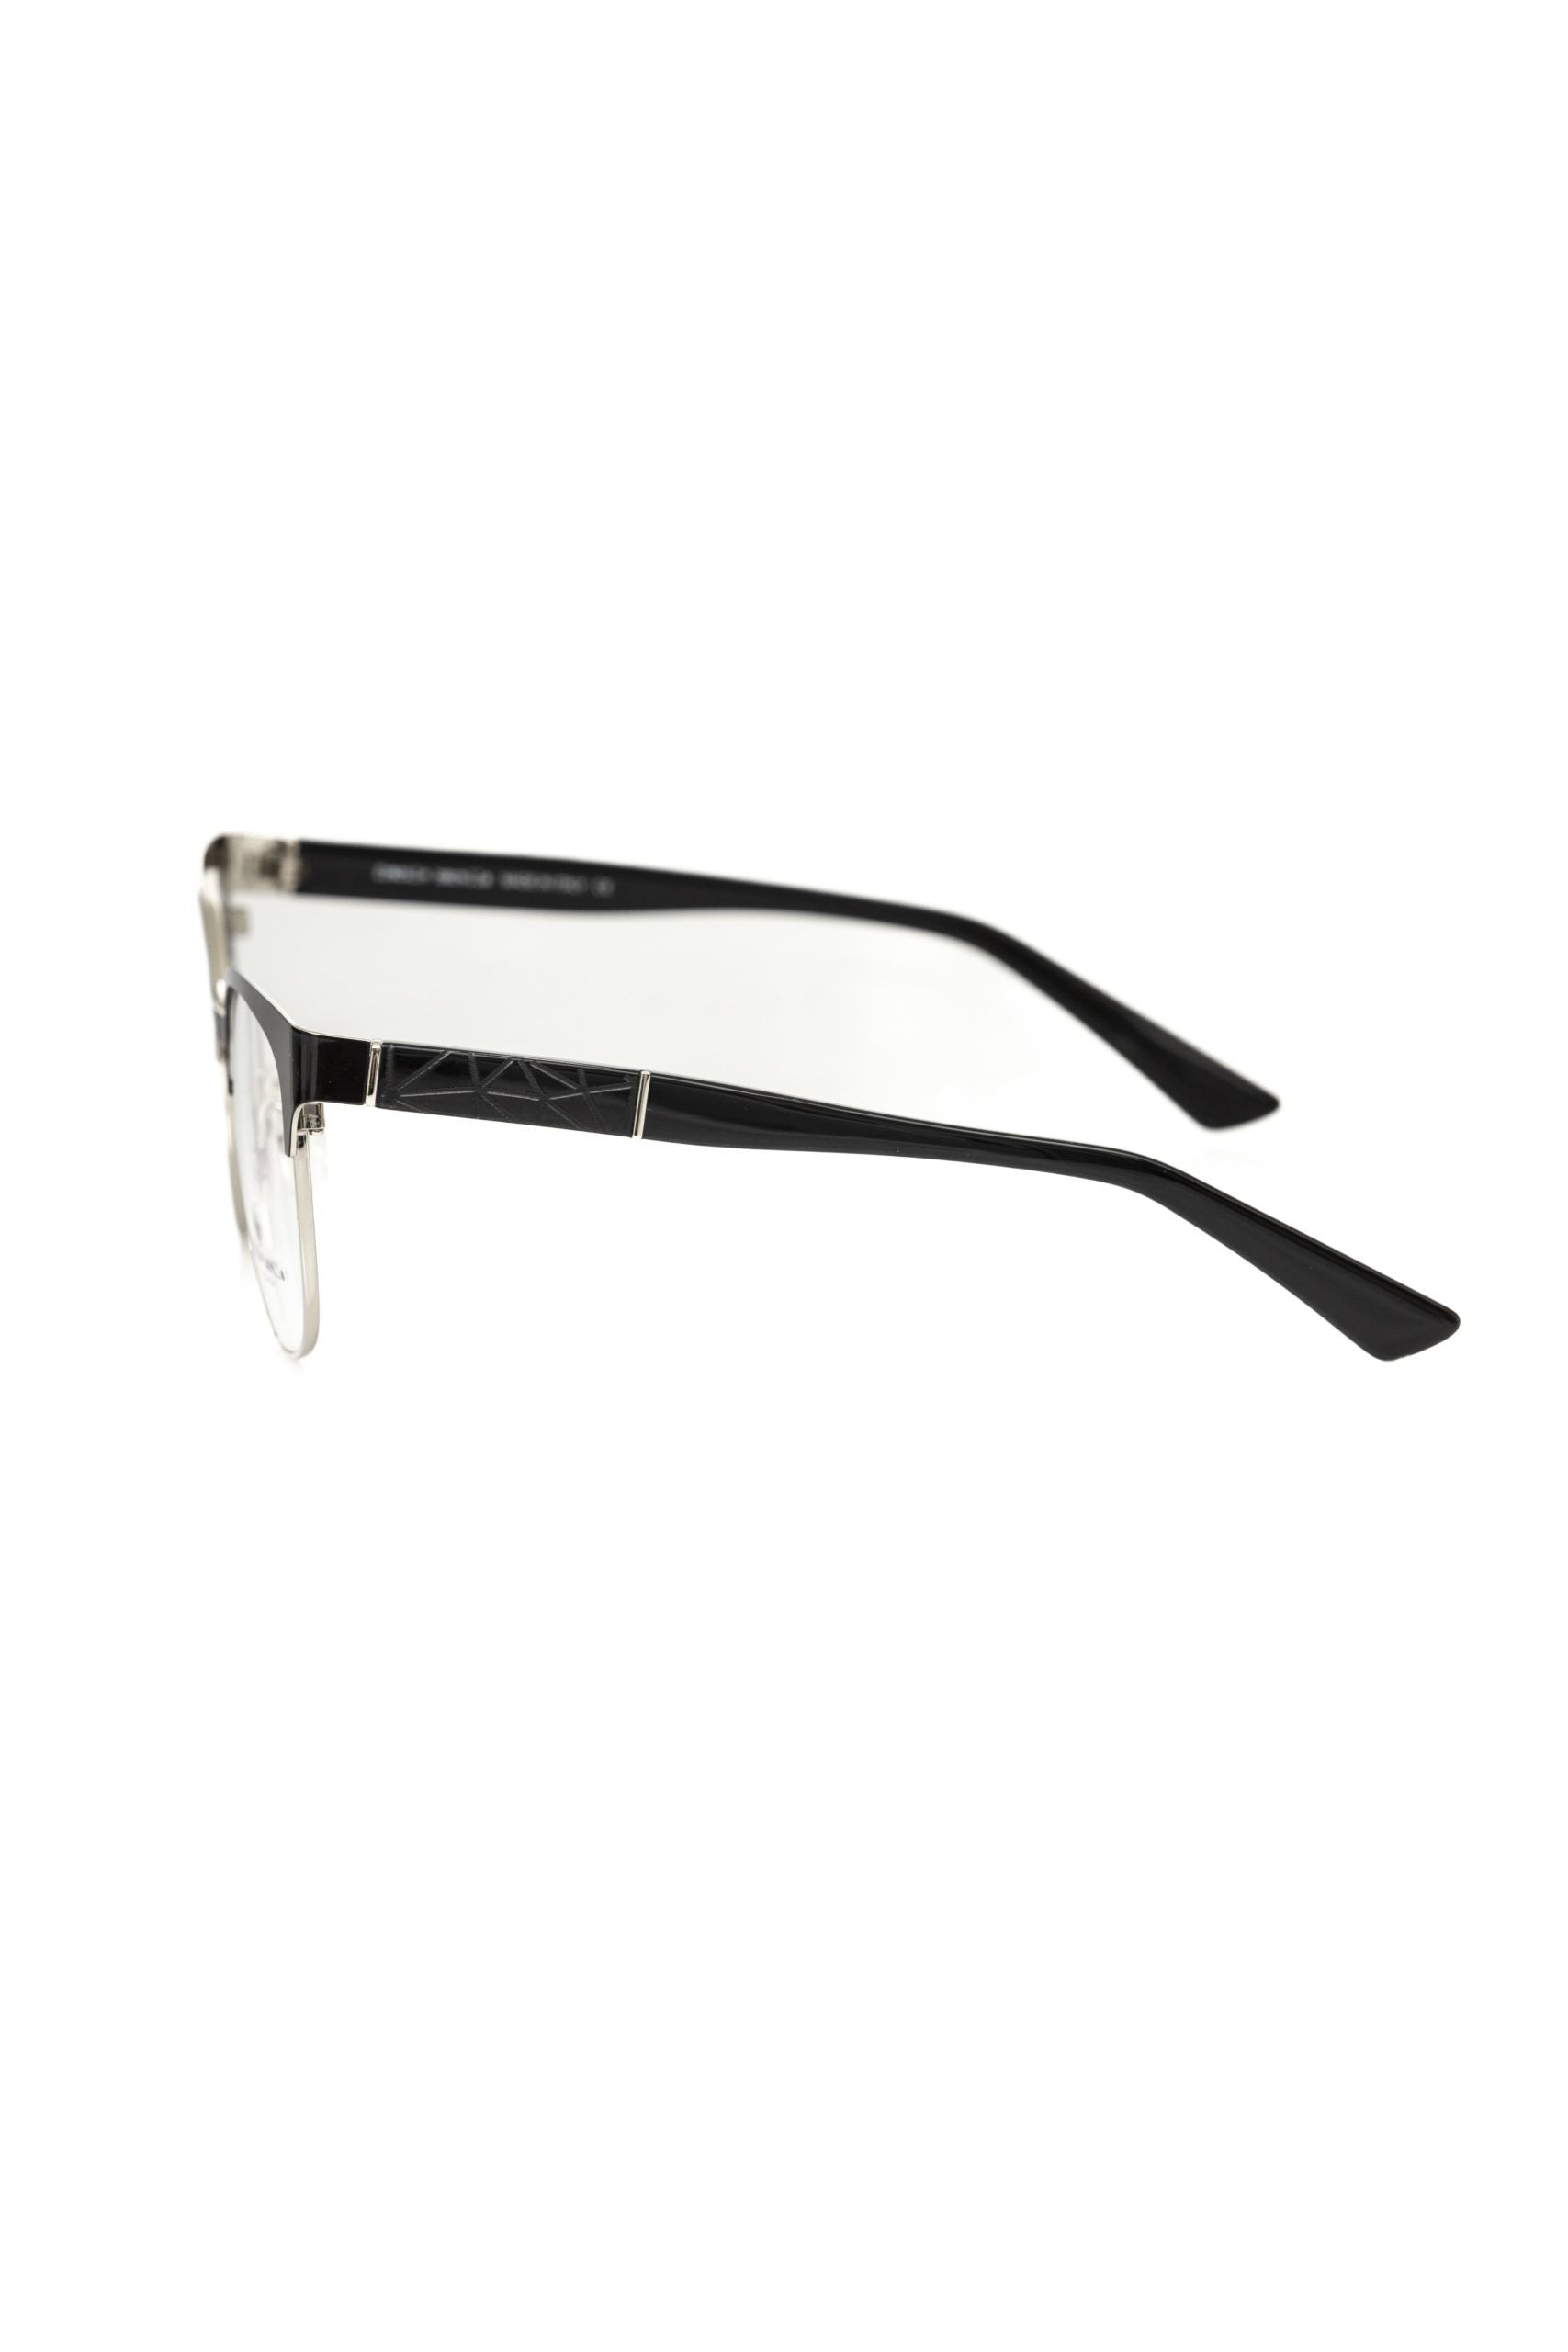 Frankie Morello FRMO-22118 Black Acetate Frames - Designed by Frankie Morello Available to Buy at a Discounted Price on Moon Behind The Hill Online Designer Discount Store